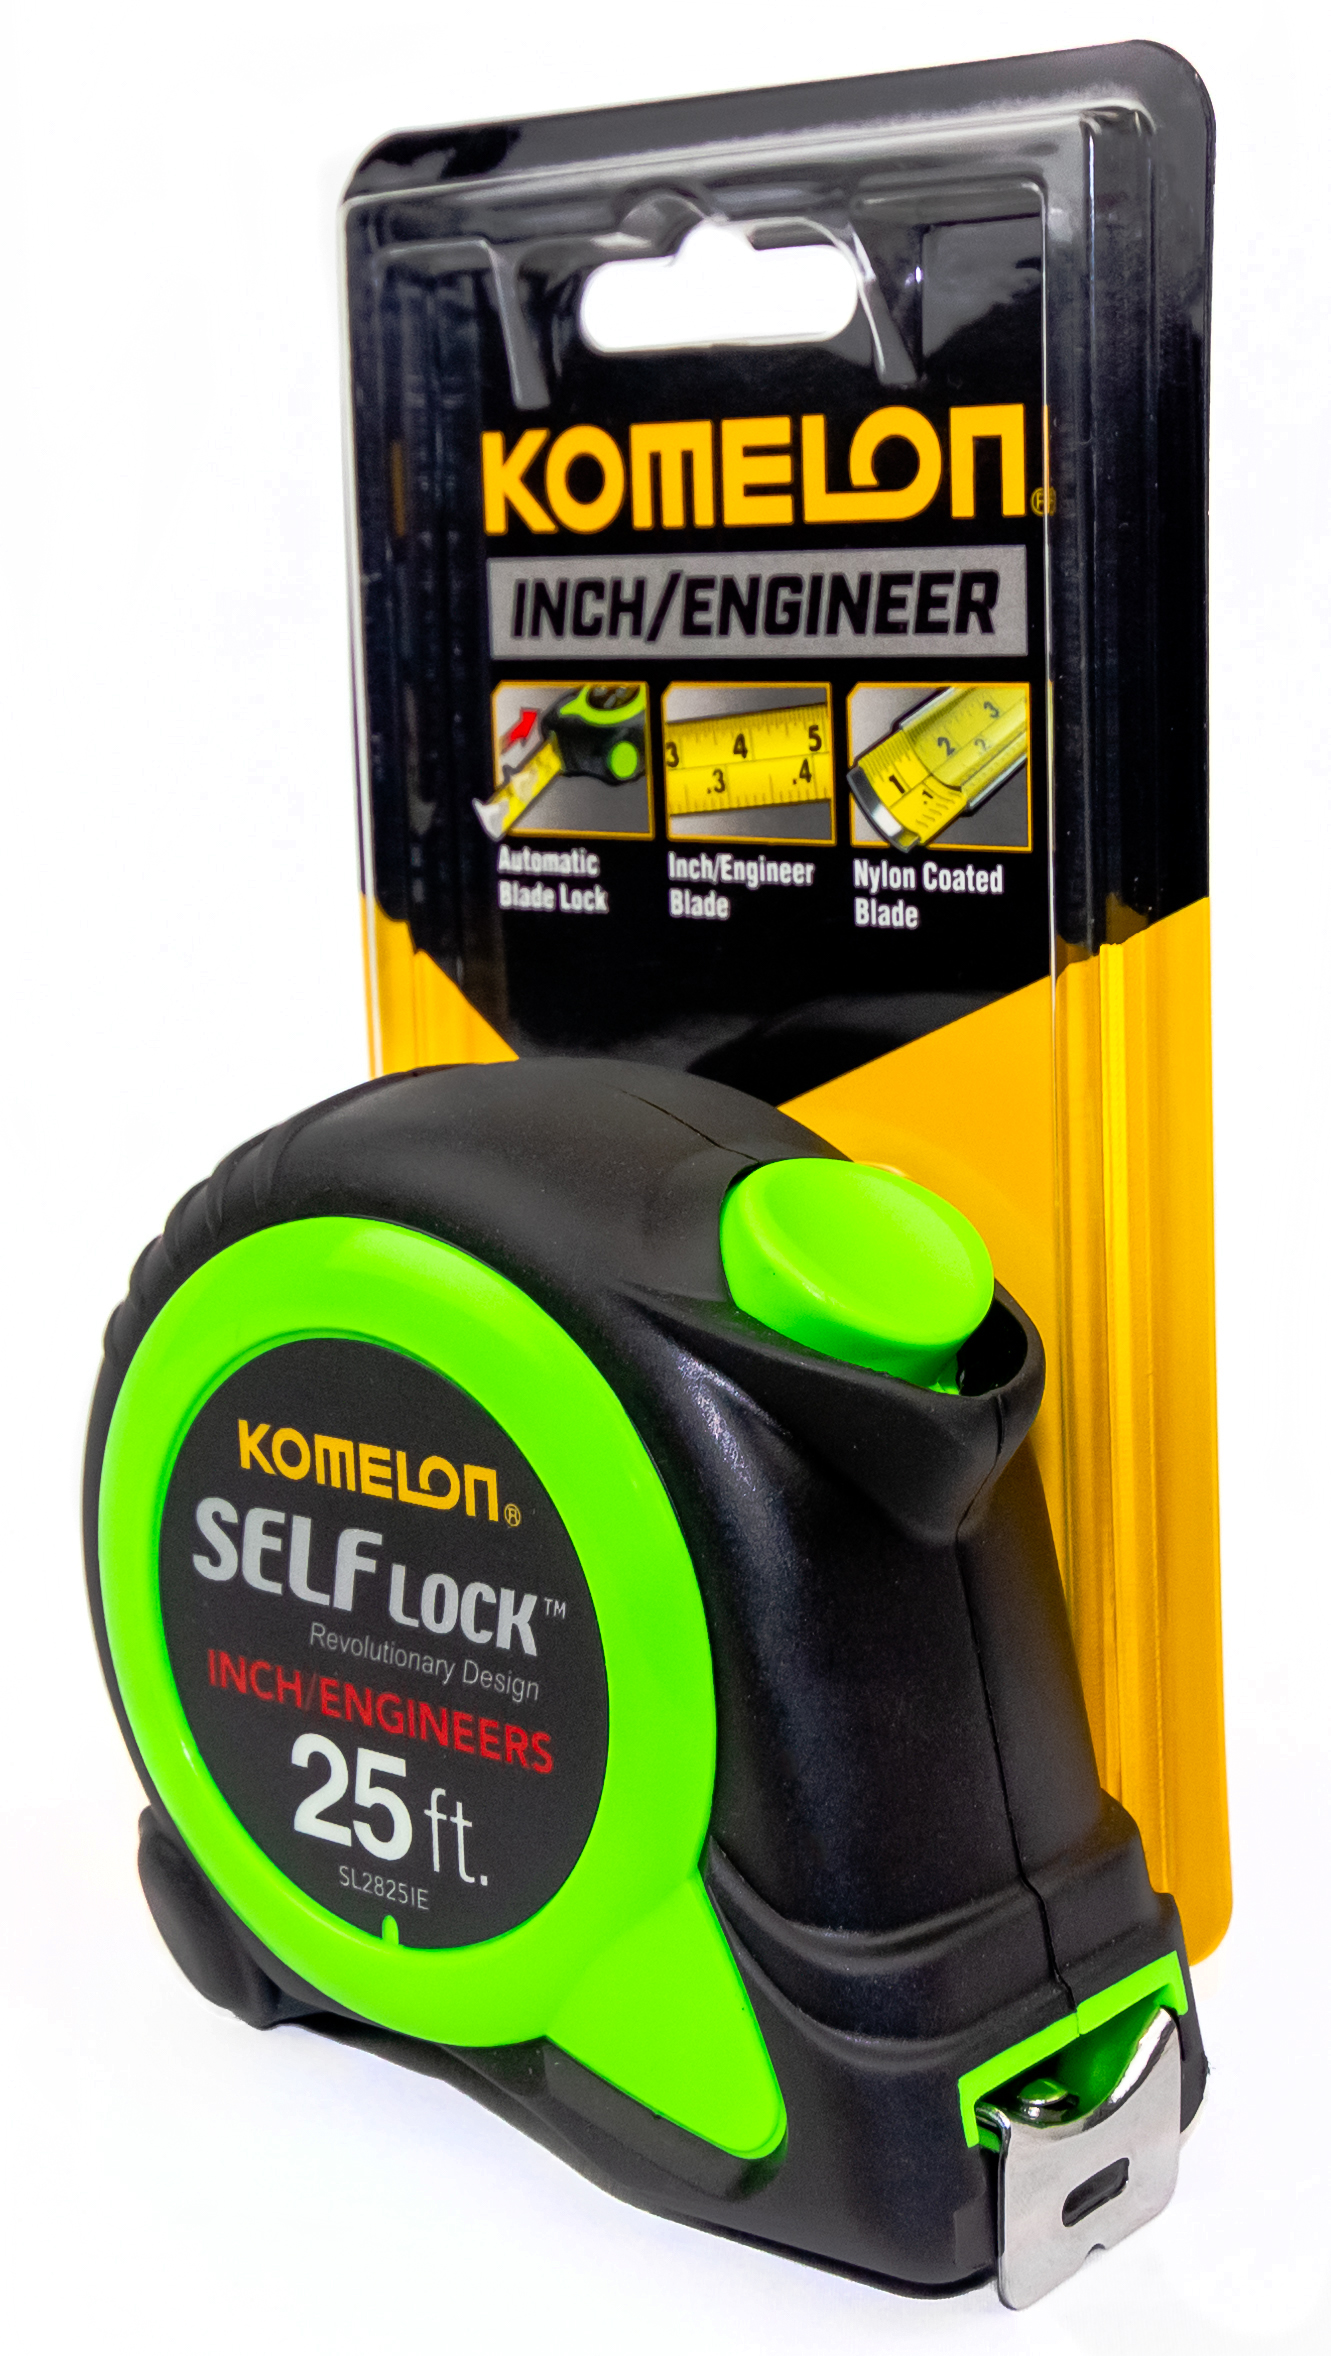 Komelon 425IEHV High-Visibility Professional Tape Measure Bother Inch and Engineer Scale Printed 25-Feet by 1-Inch Chrome 